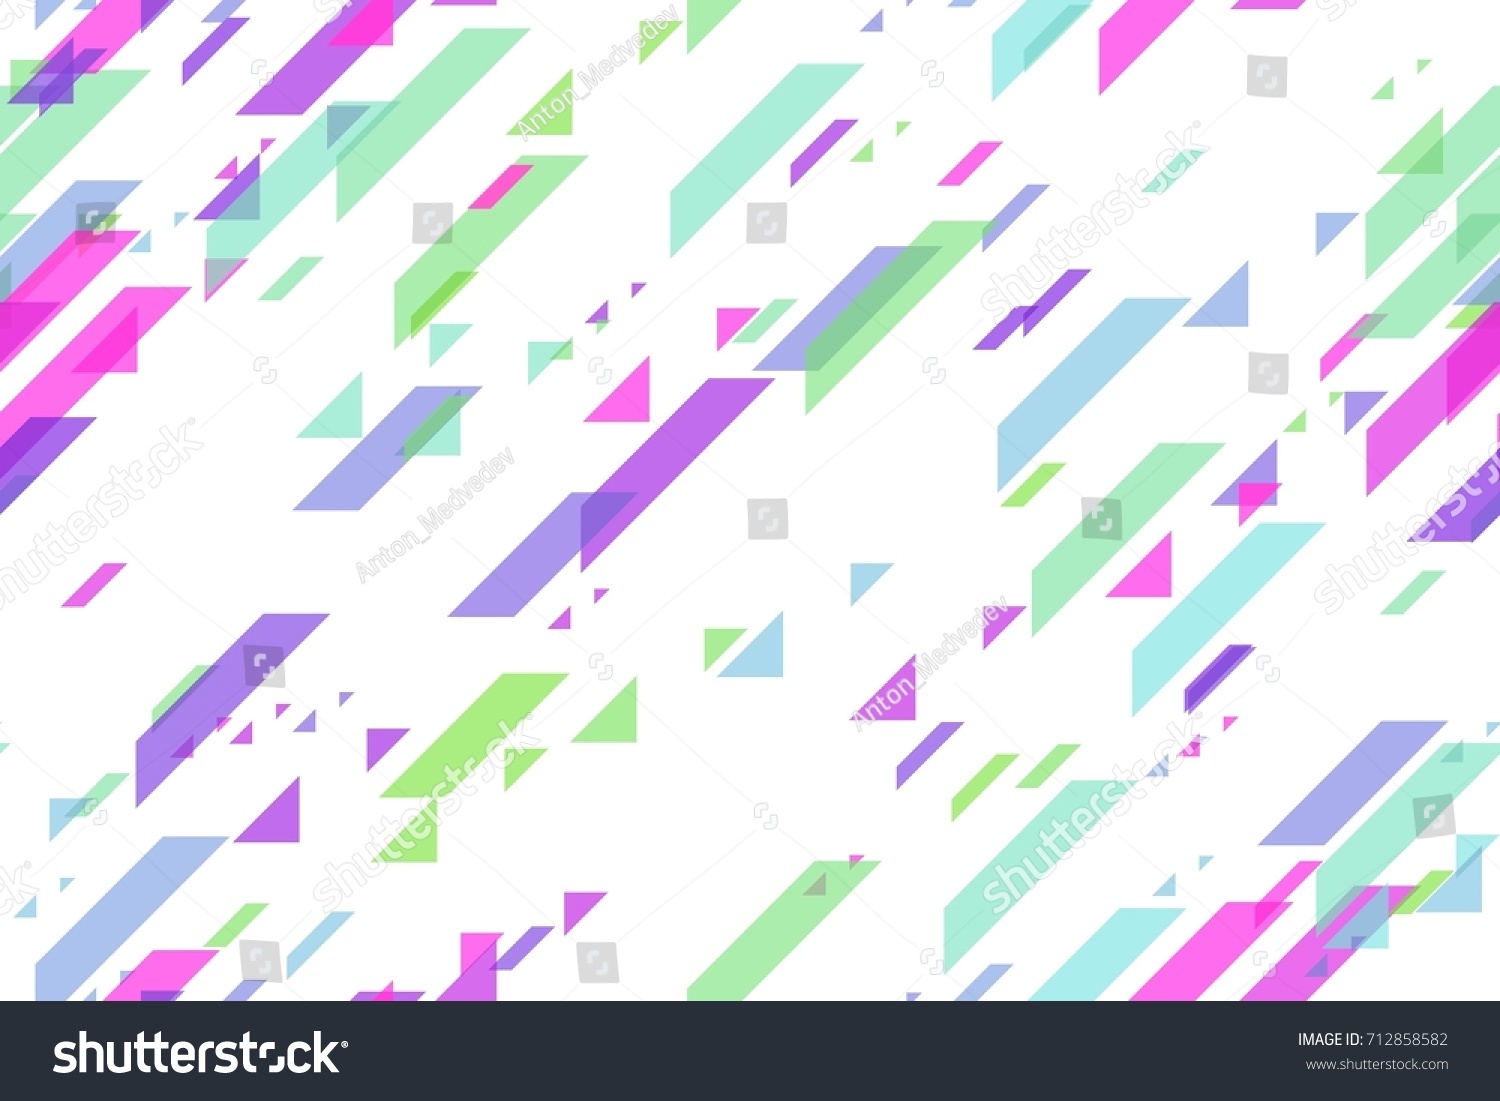 Seamless Festival Green Triangles Diagonal Lines Stock